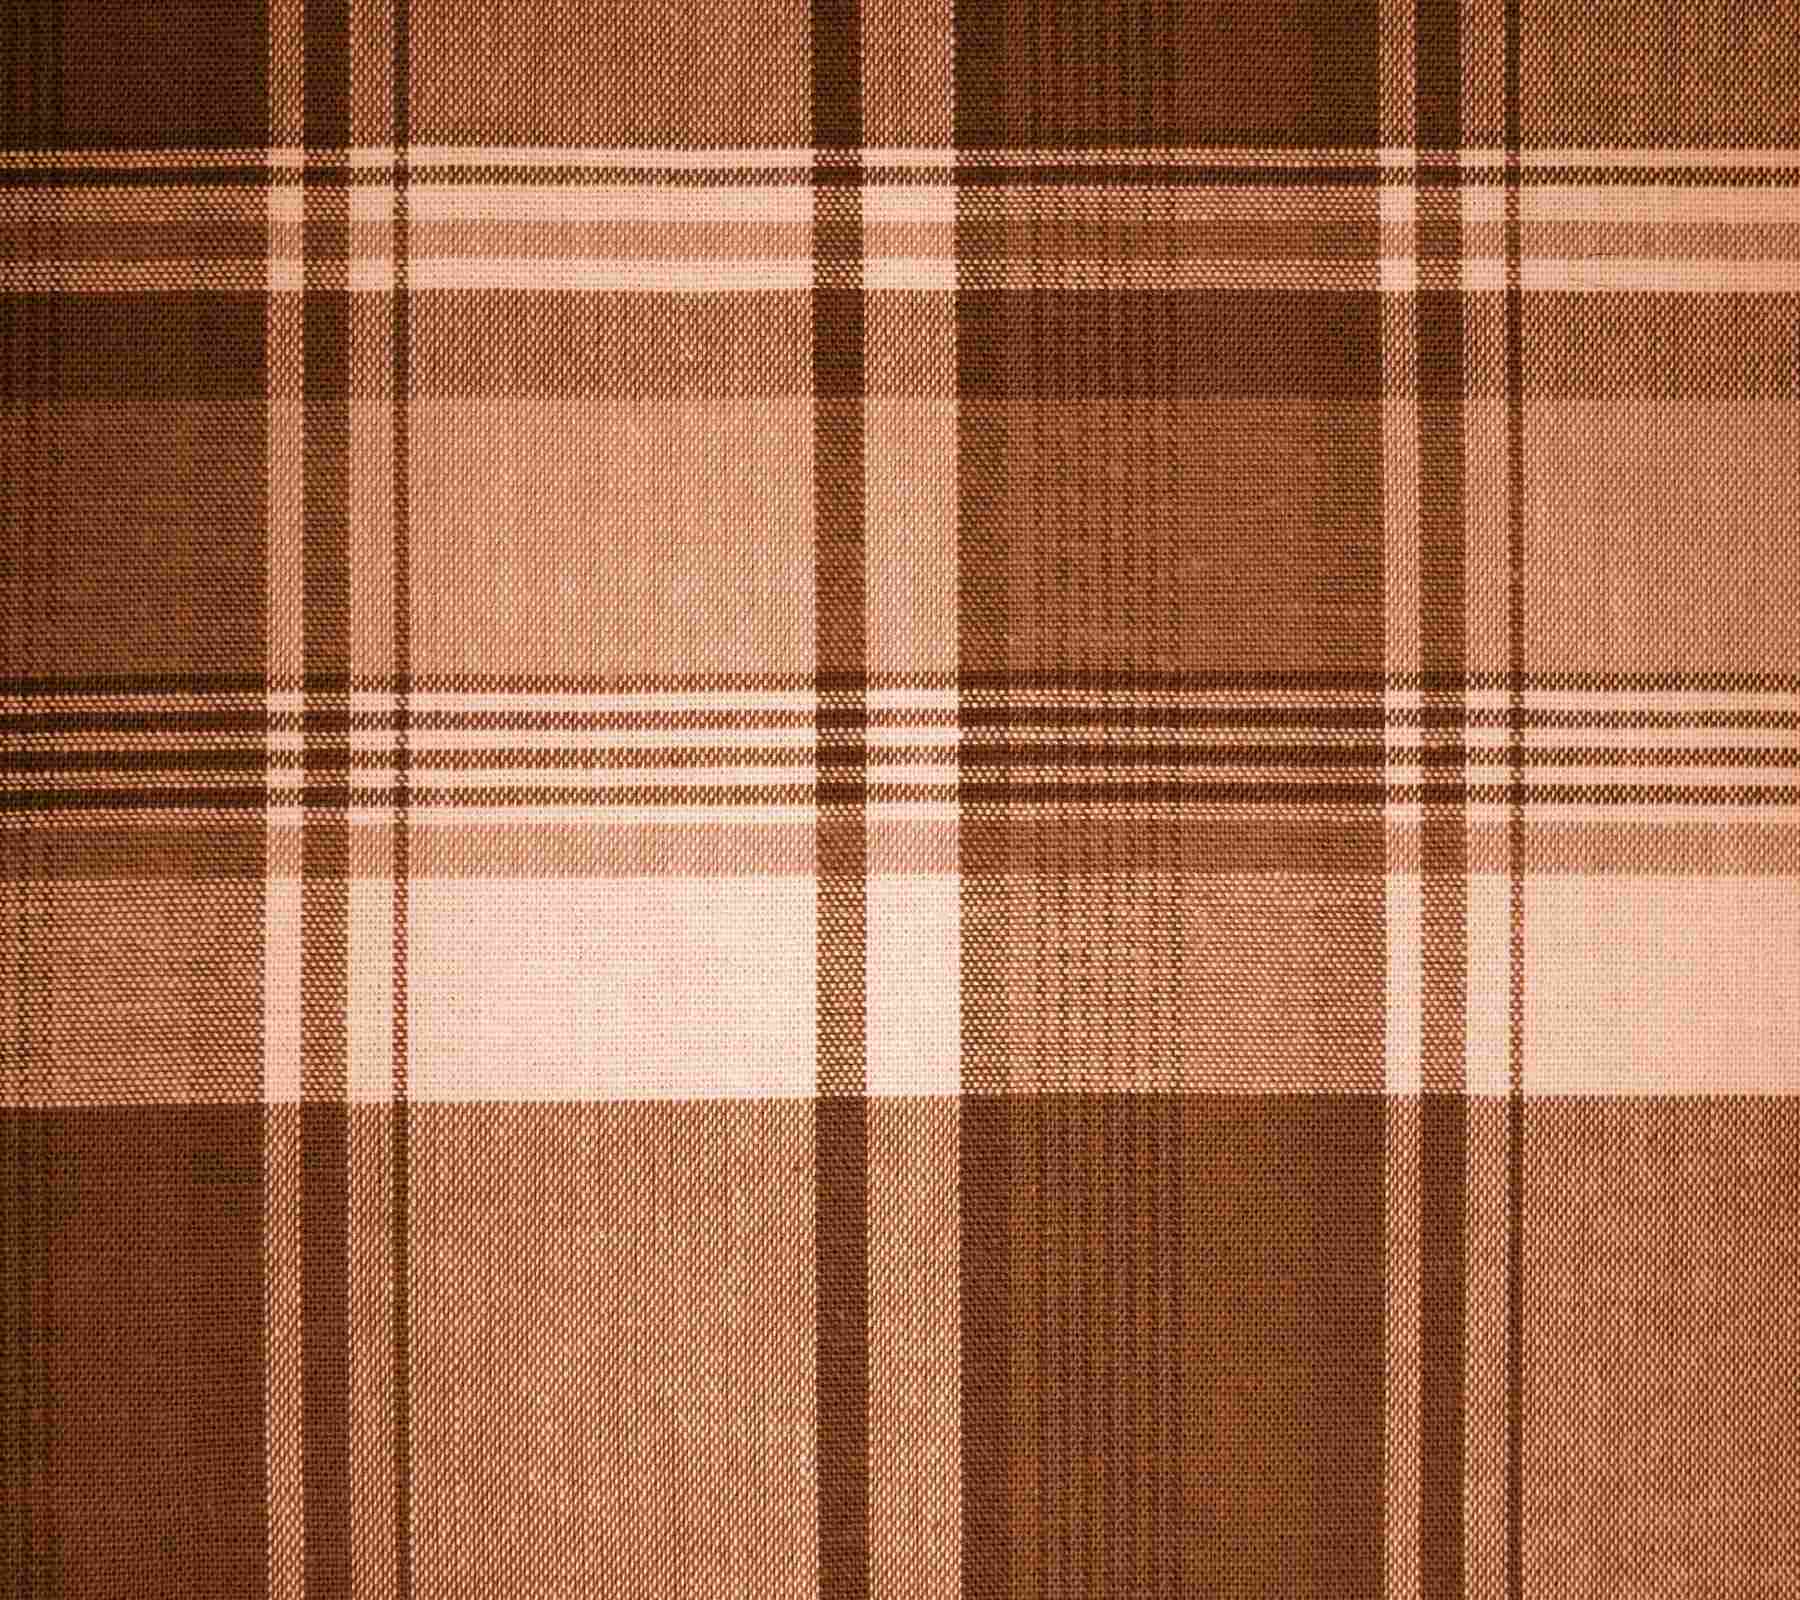 Brown Plaid Fabric Background Image Wallpaper Or